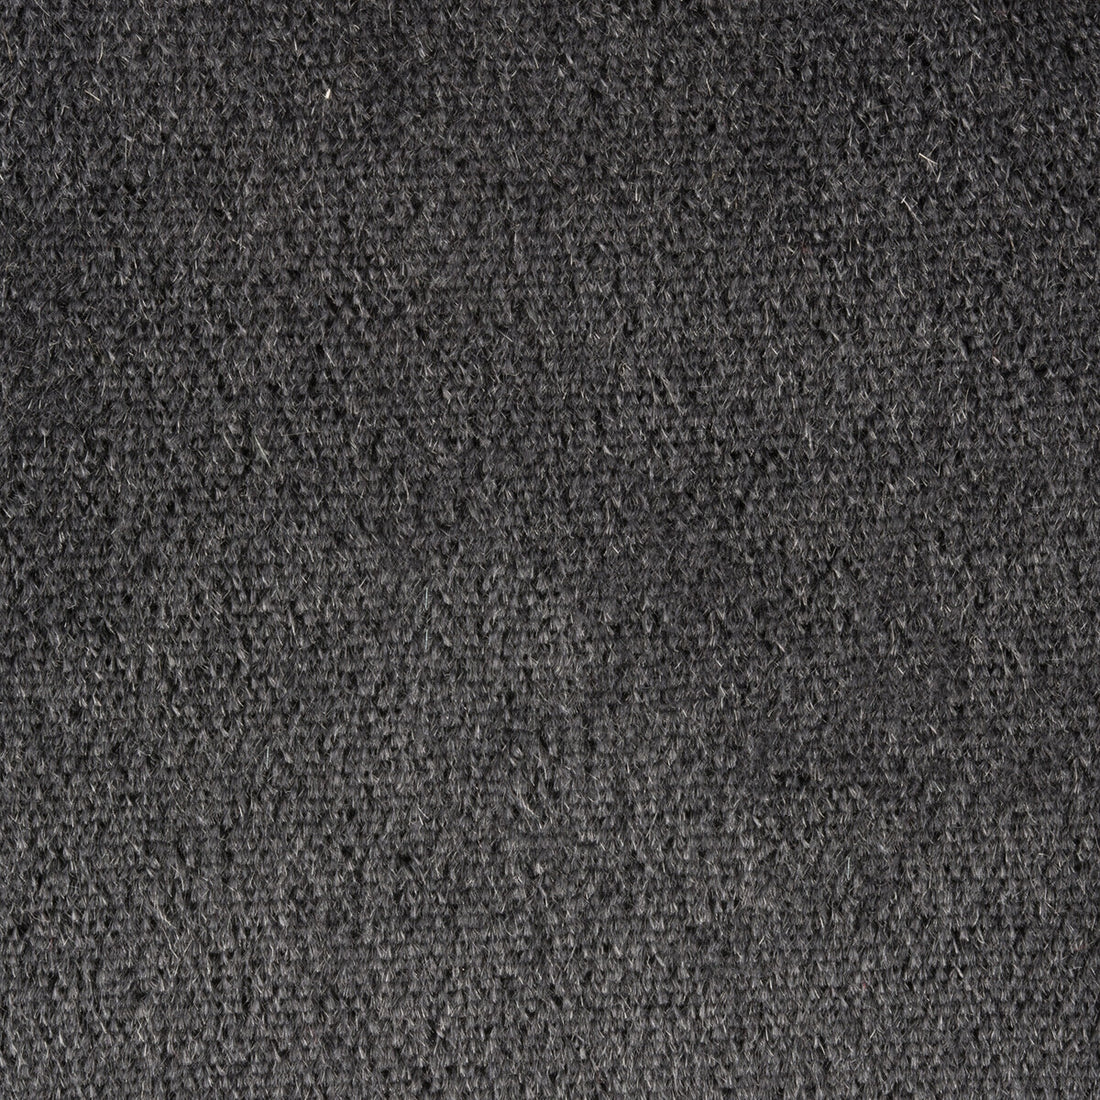 Bennett fabric in coal color - pattern 2014138.85.0 - by Lee Jofa in the James Huniford collection